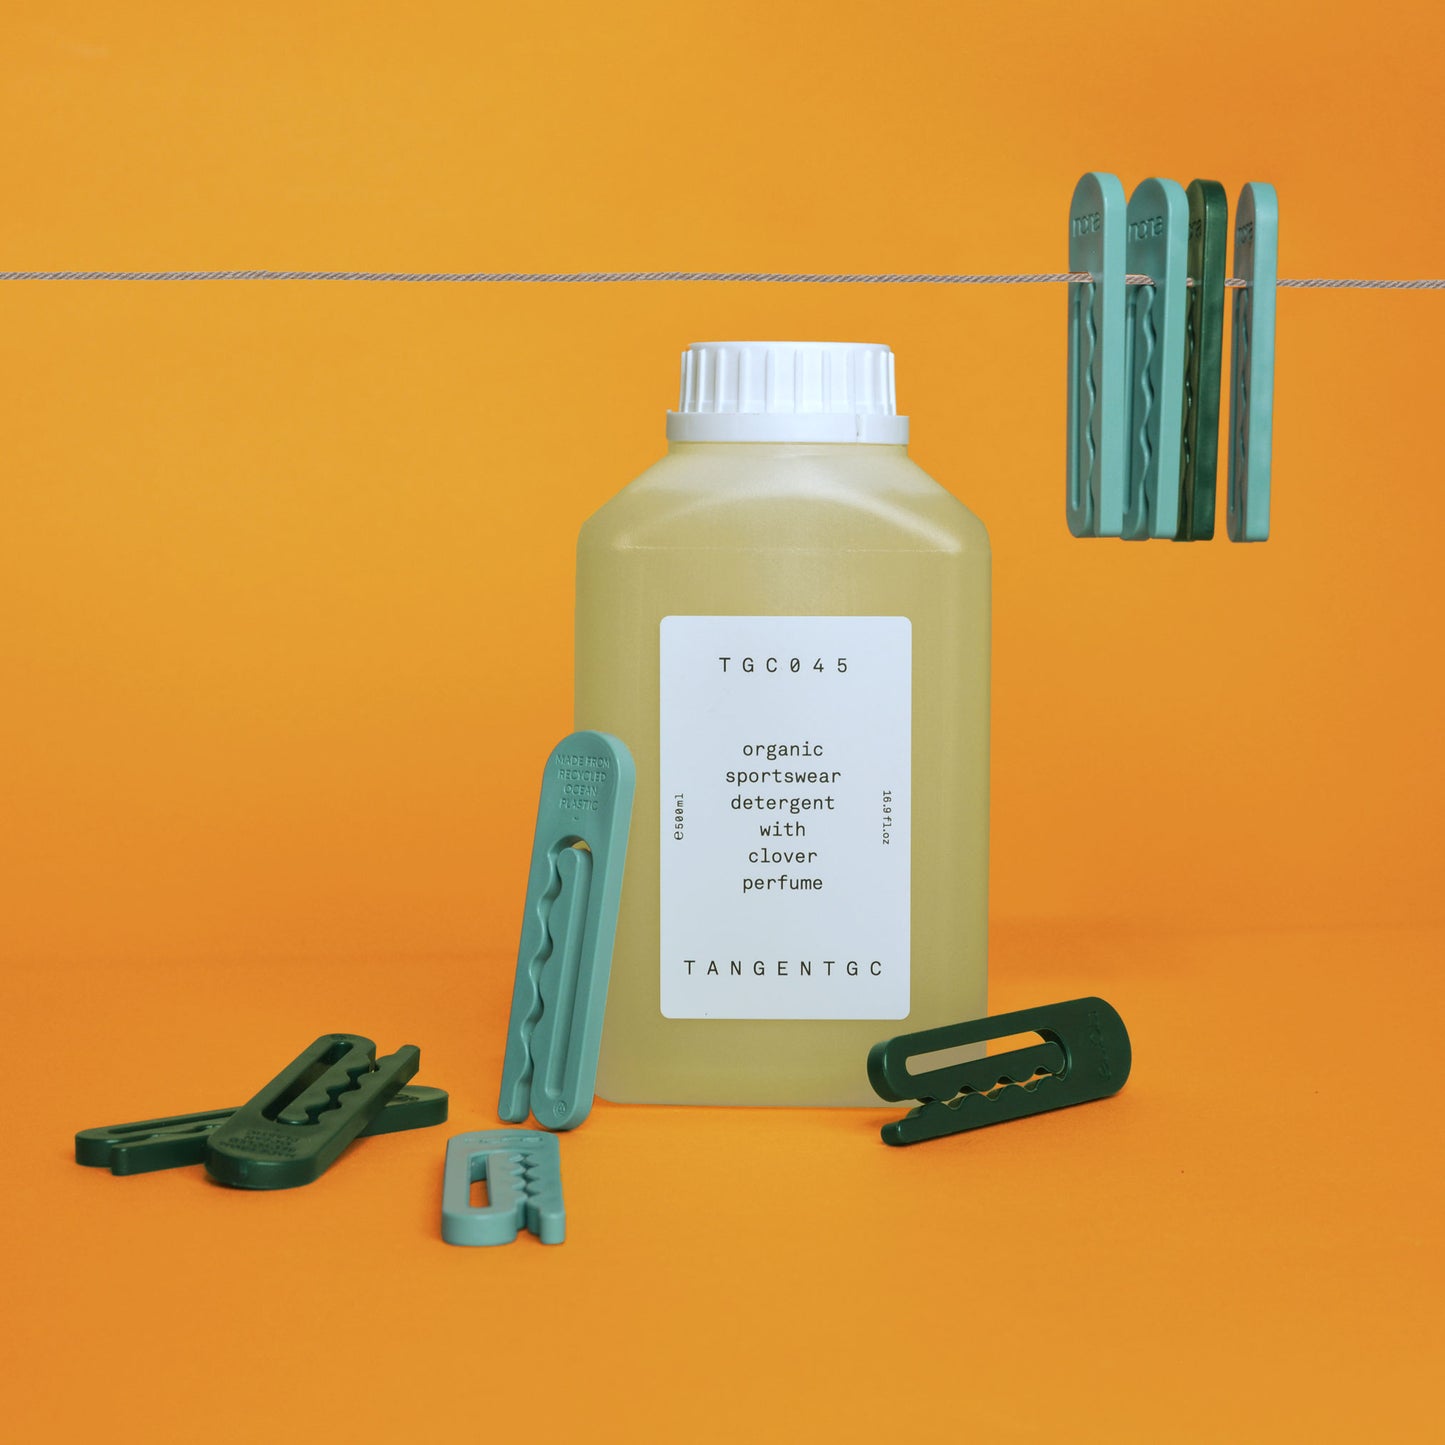 A bottle of sportswear specialty detergent photographed with green ocean plastic clothespins, some of which hang from a clothesline overhead